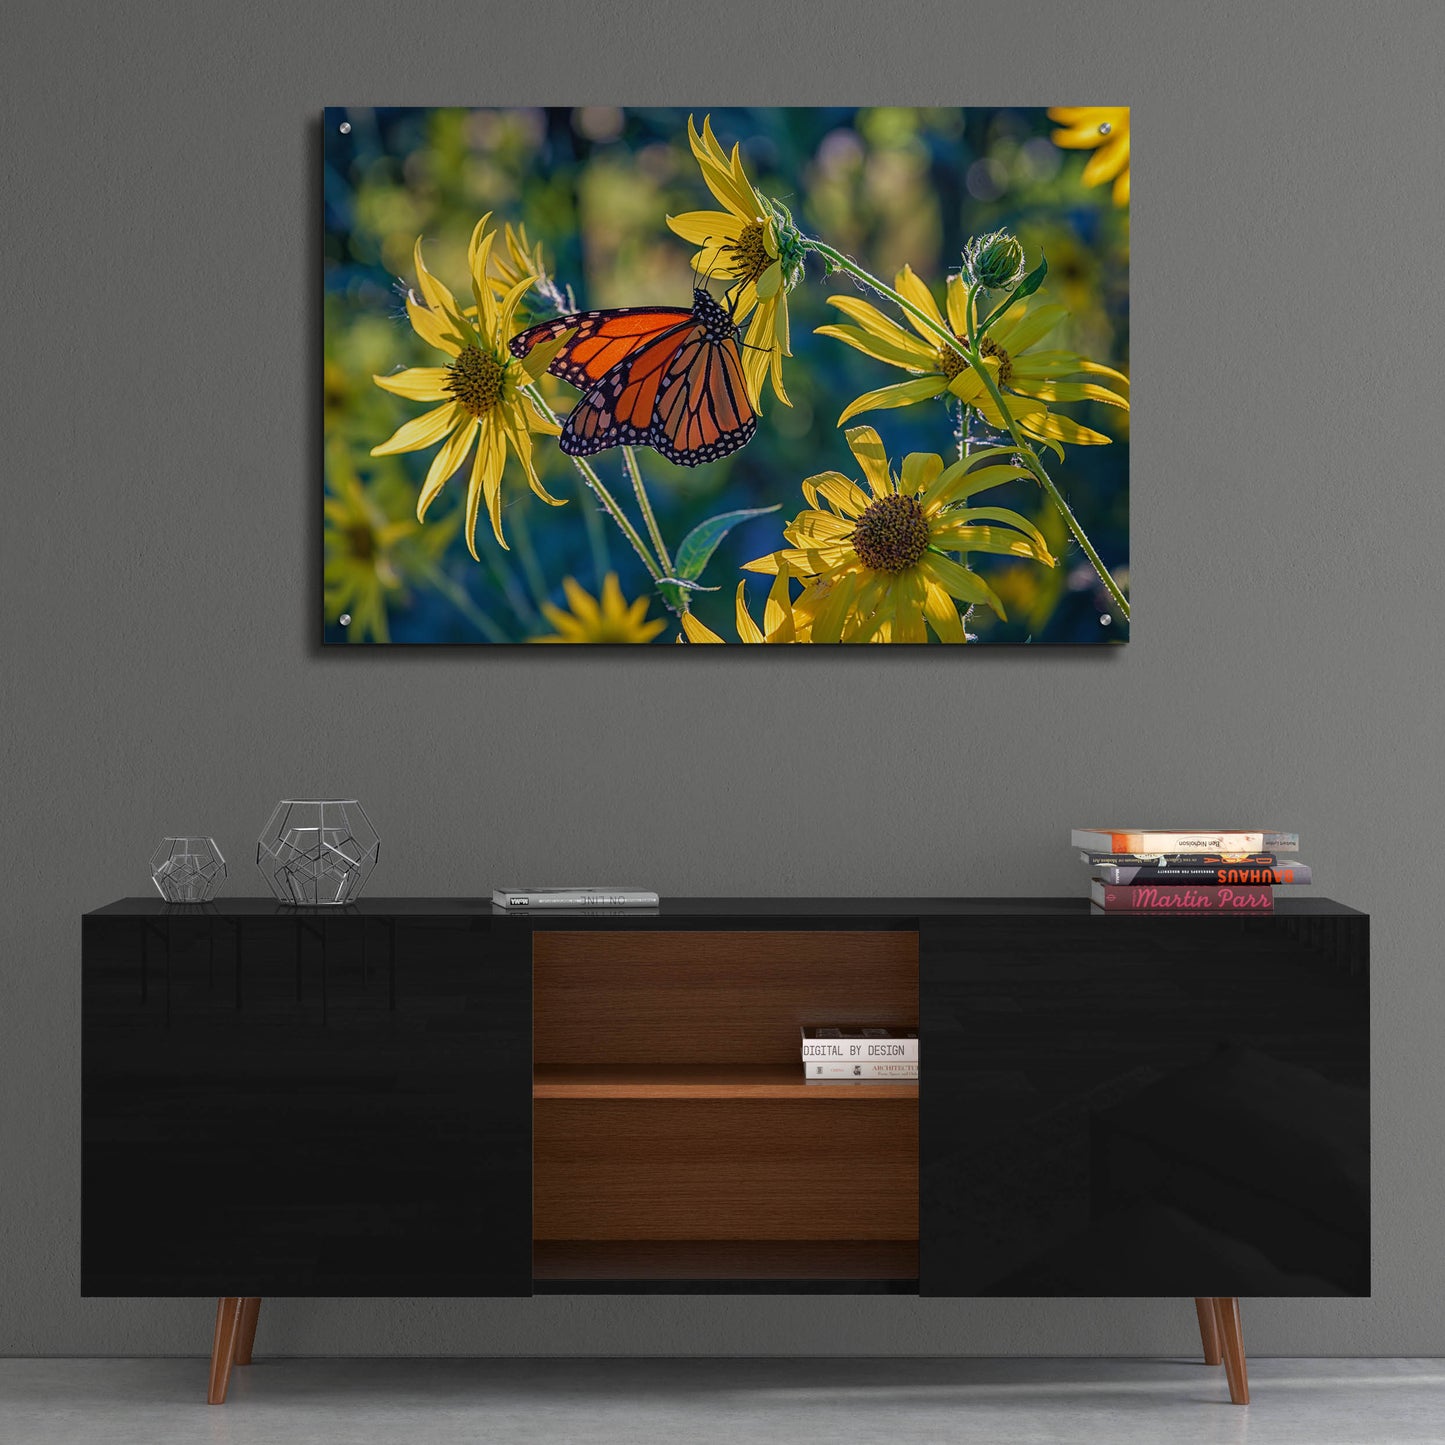 Epic Art 'The Monarch and the Sunflower' by Rick Berk, Acrylic Glass Wall Art,36x24